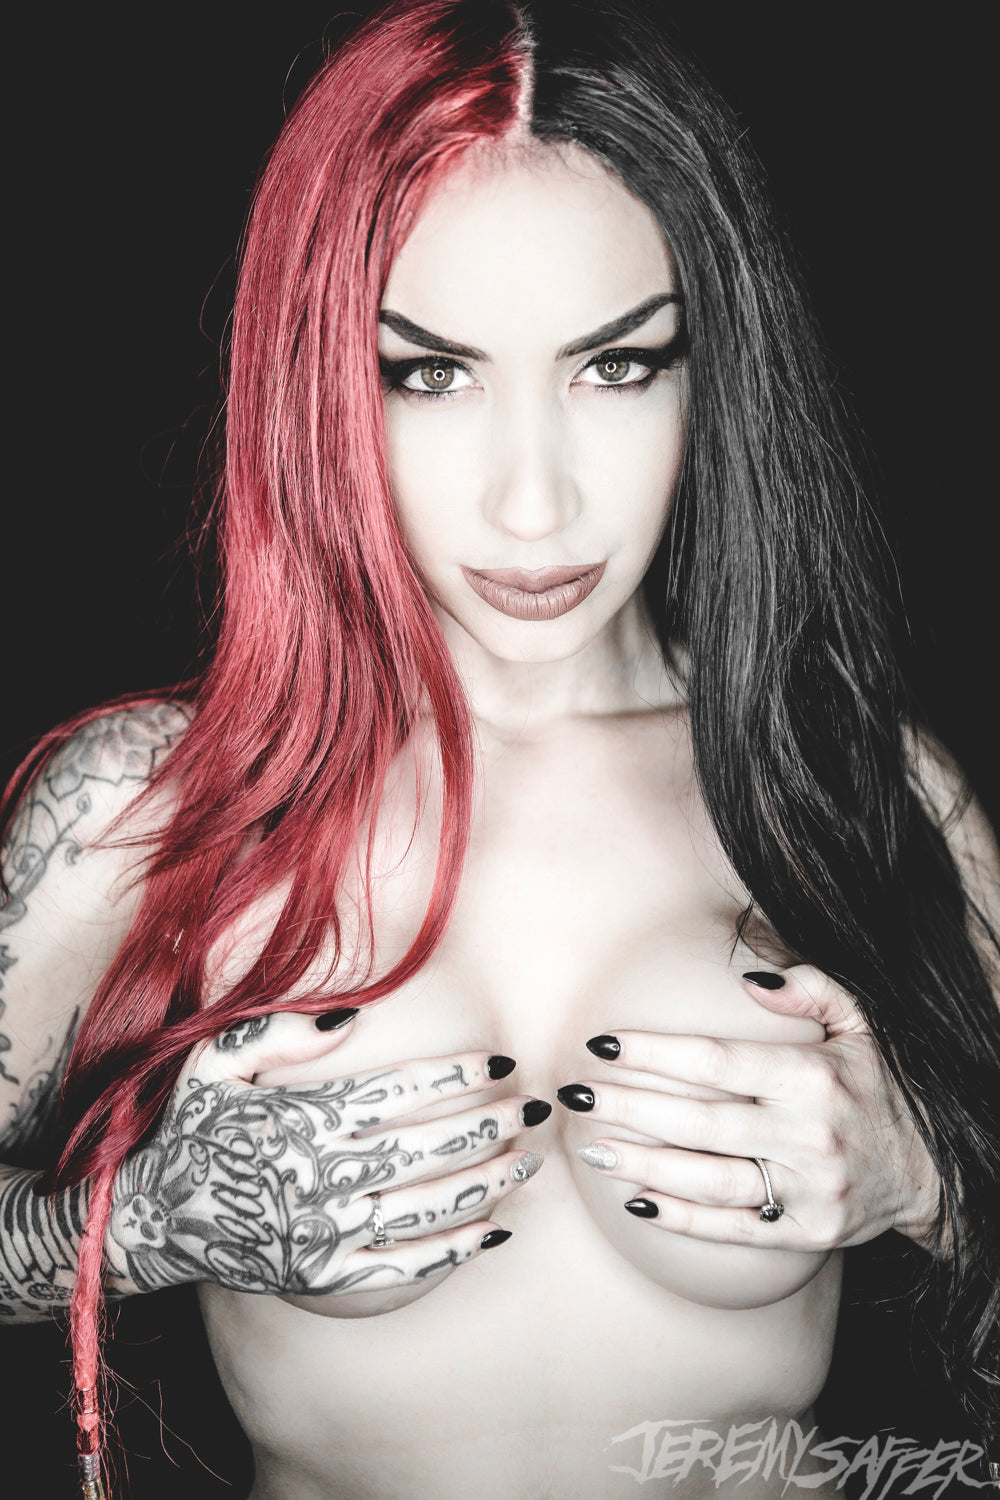 Ash Costello - Covered Up - Signed Limited Edition Metallic 8x12 Print